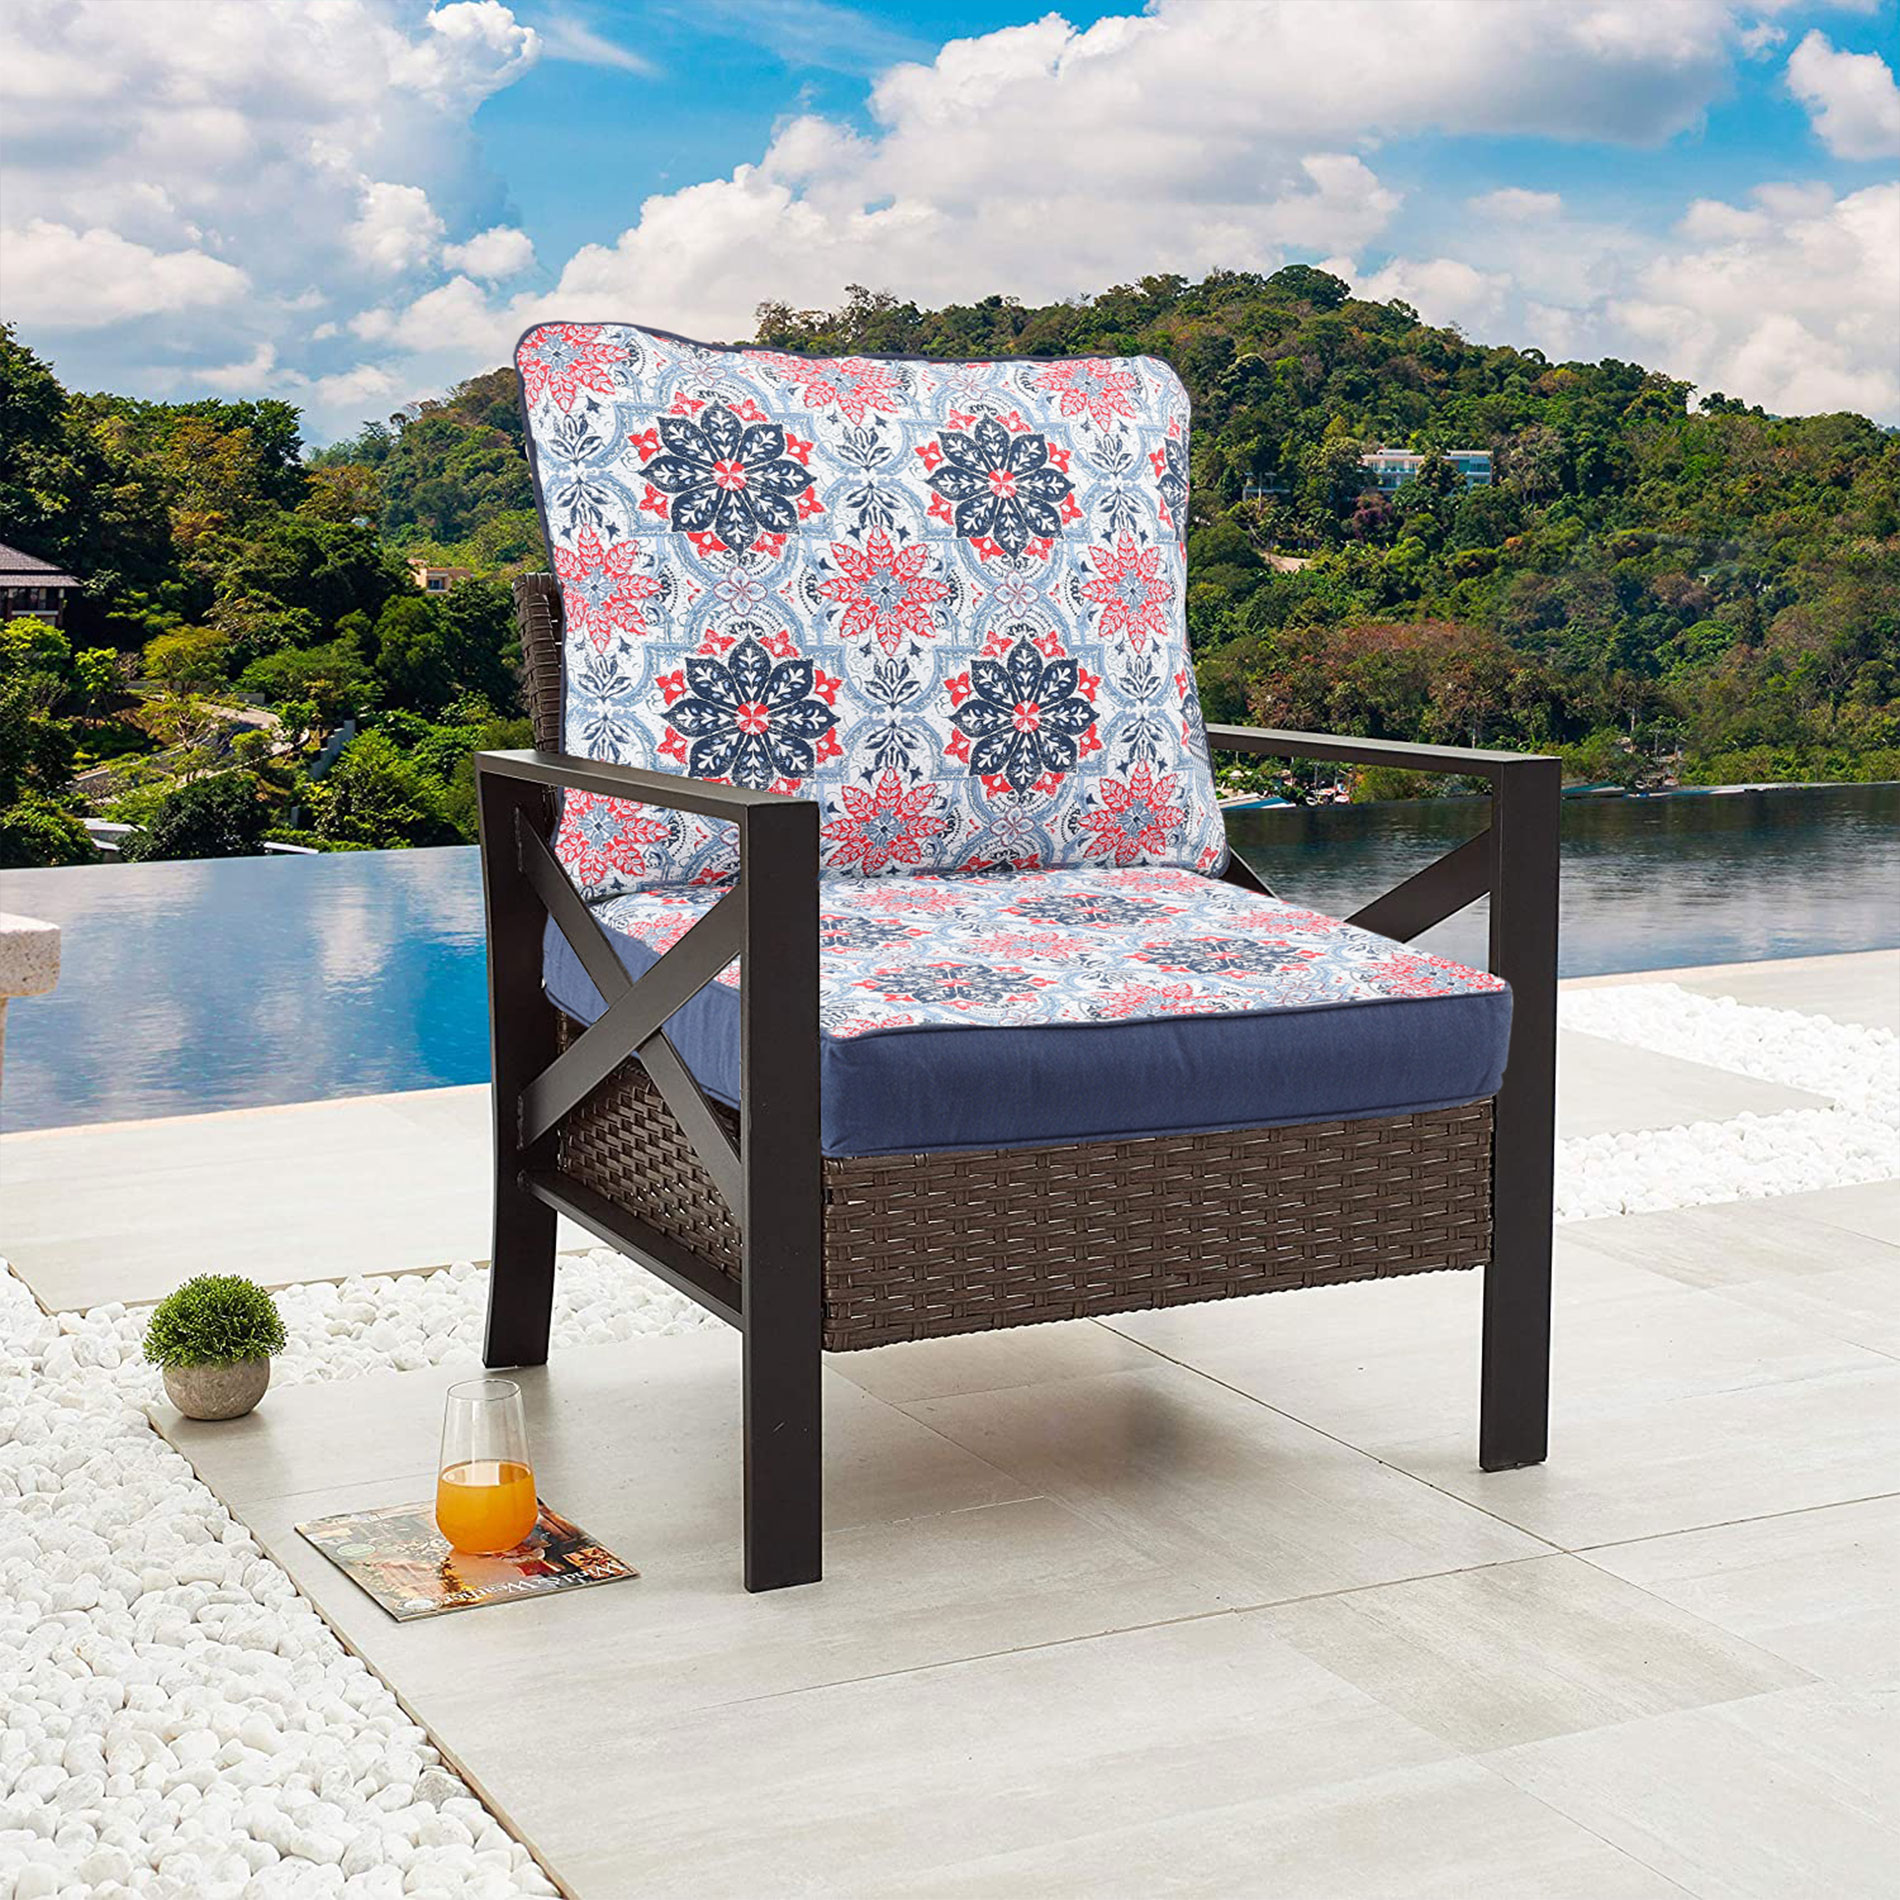 Aoodor 23'' x 24'' Outdoor Deep Seat Chair Cushion Set with Dust Jacket - Set of 2 (2 Back, 2 Seater )